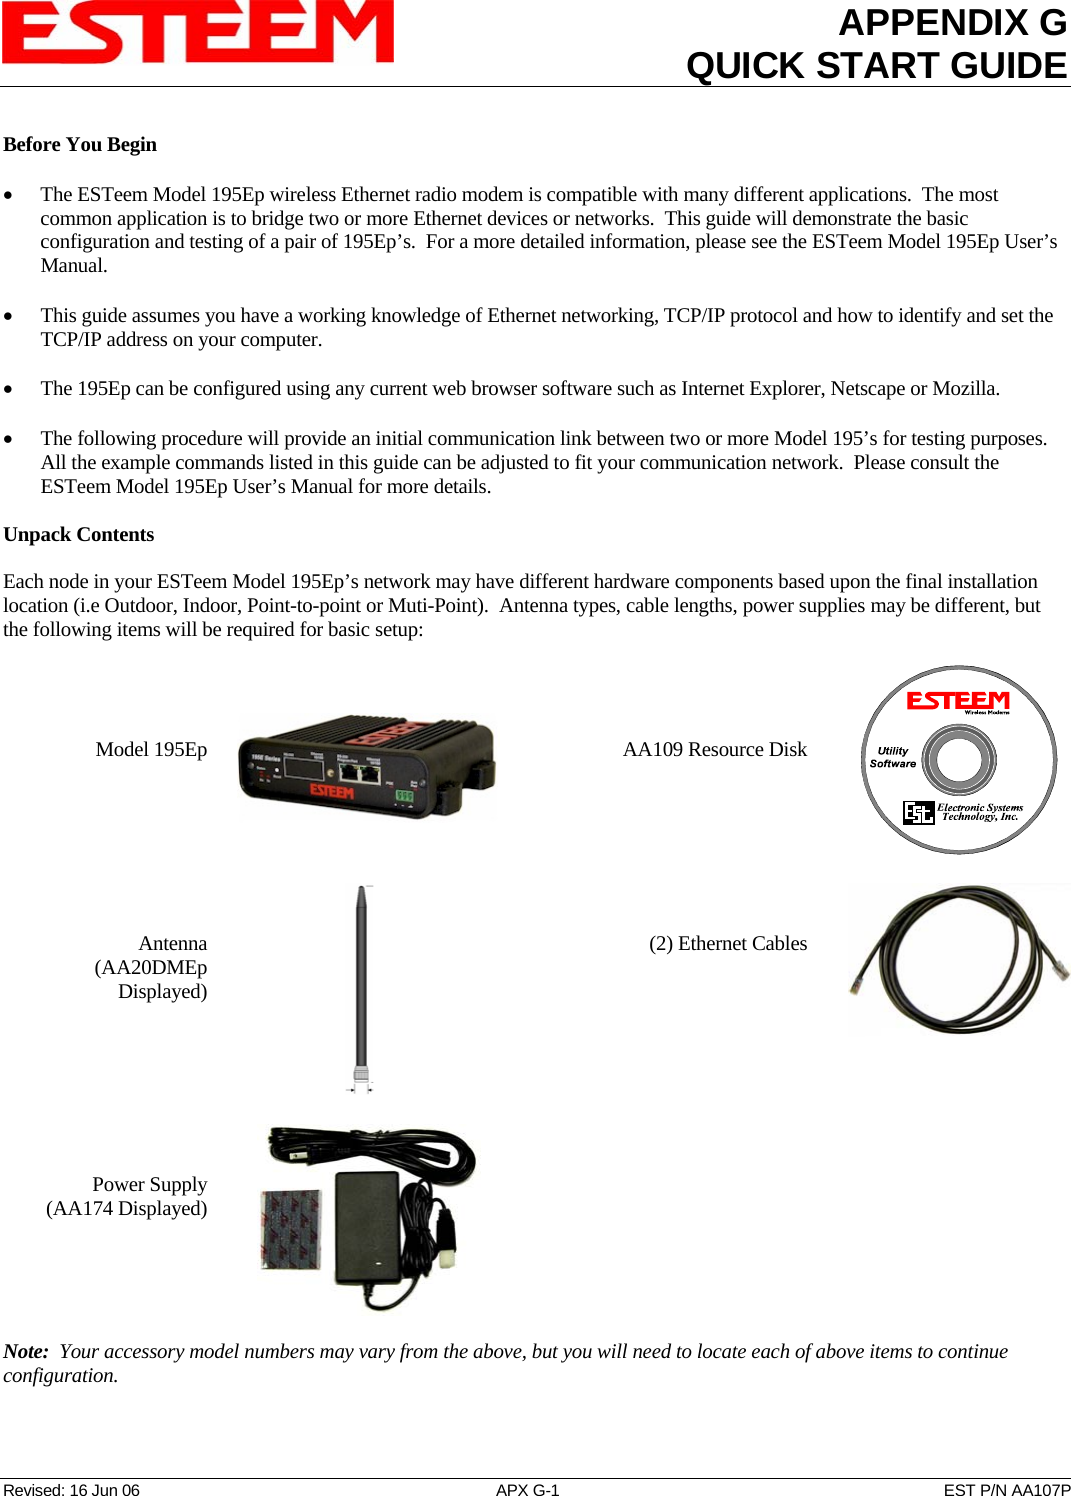 APPENDIX GQUICK START GUIDE   Revised: 16 Jun 06  APX G-1  EST P/N AA107P Before You Begin  • The ESTeem Model 195Ep wireless Ethernet radio modem is compatible with many different applications.  The most common application is to bridge two or more Ethernet devices or networks.  This guide will demonstrate the basic configuration and testing of a pair of 195Ep’s.  For a more detailed information, please see the ESTeem Model 195Ep User’s Manual.  • This guide assumes you have a working knowledge of Ethernet networking, TCP/IP protocol and how to identify and set the TCP/IP address on your computer.  • The 195Ep can be configured using any current web browser software such as Internet Explorer, Netscape or Mozilla.  • The following procedure will provide an initial communication link between two or more Model 195’s for testing purposes.  All the example commands listed in this guide can be adjusted to fit your communication network.  Please consult the ESTeem Model 195Ep User’s Manual for more details.  Unpack Contents  Each node in your ESTeem Model 195Ep’s network may have different hardware components based upon the final installation location (i.e Outdoor, Indoor, Point-to-point or Muti-Point).  Antenna types, cable lengths, power supplies may be different, but the following items will be required for basic setup:     Model 195Ep       AA109 Resource Disk         Antenna  (AA20DMEp Displayed)                            (2) Ethernet Cables         Power Supply (AA174 Displayed)     Note:  Your accessory model numbers may vary from the above, but you will need to locate each of above items to continue configuration.  